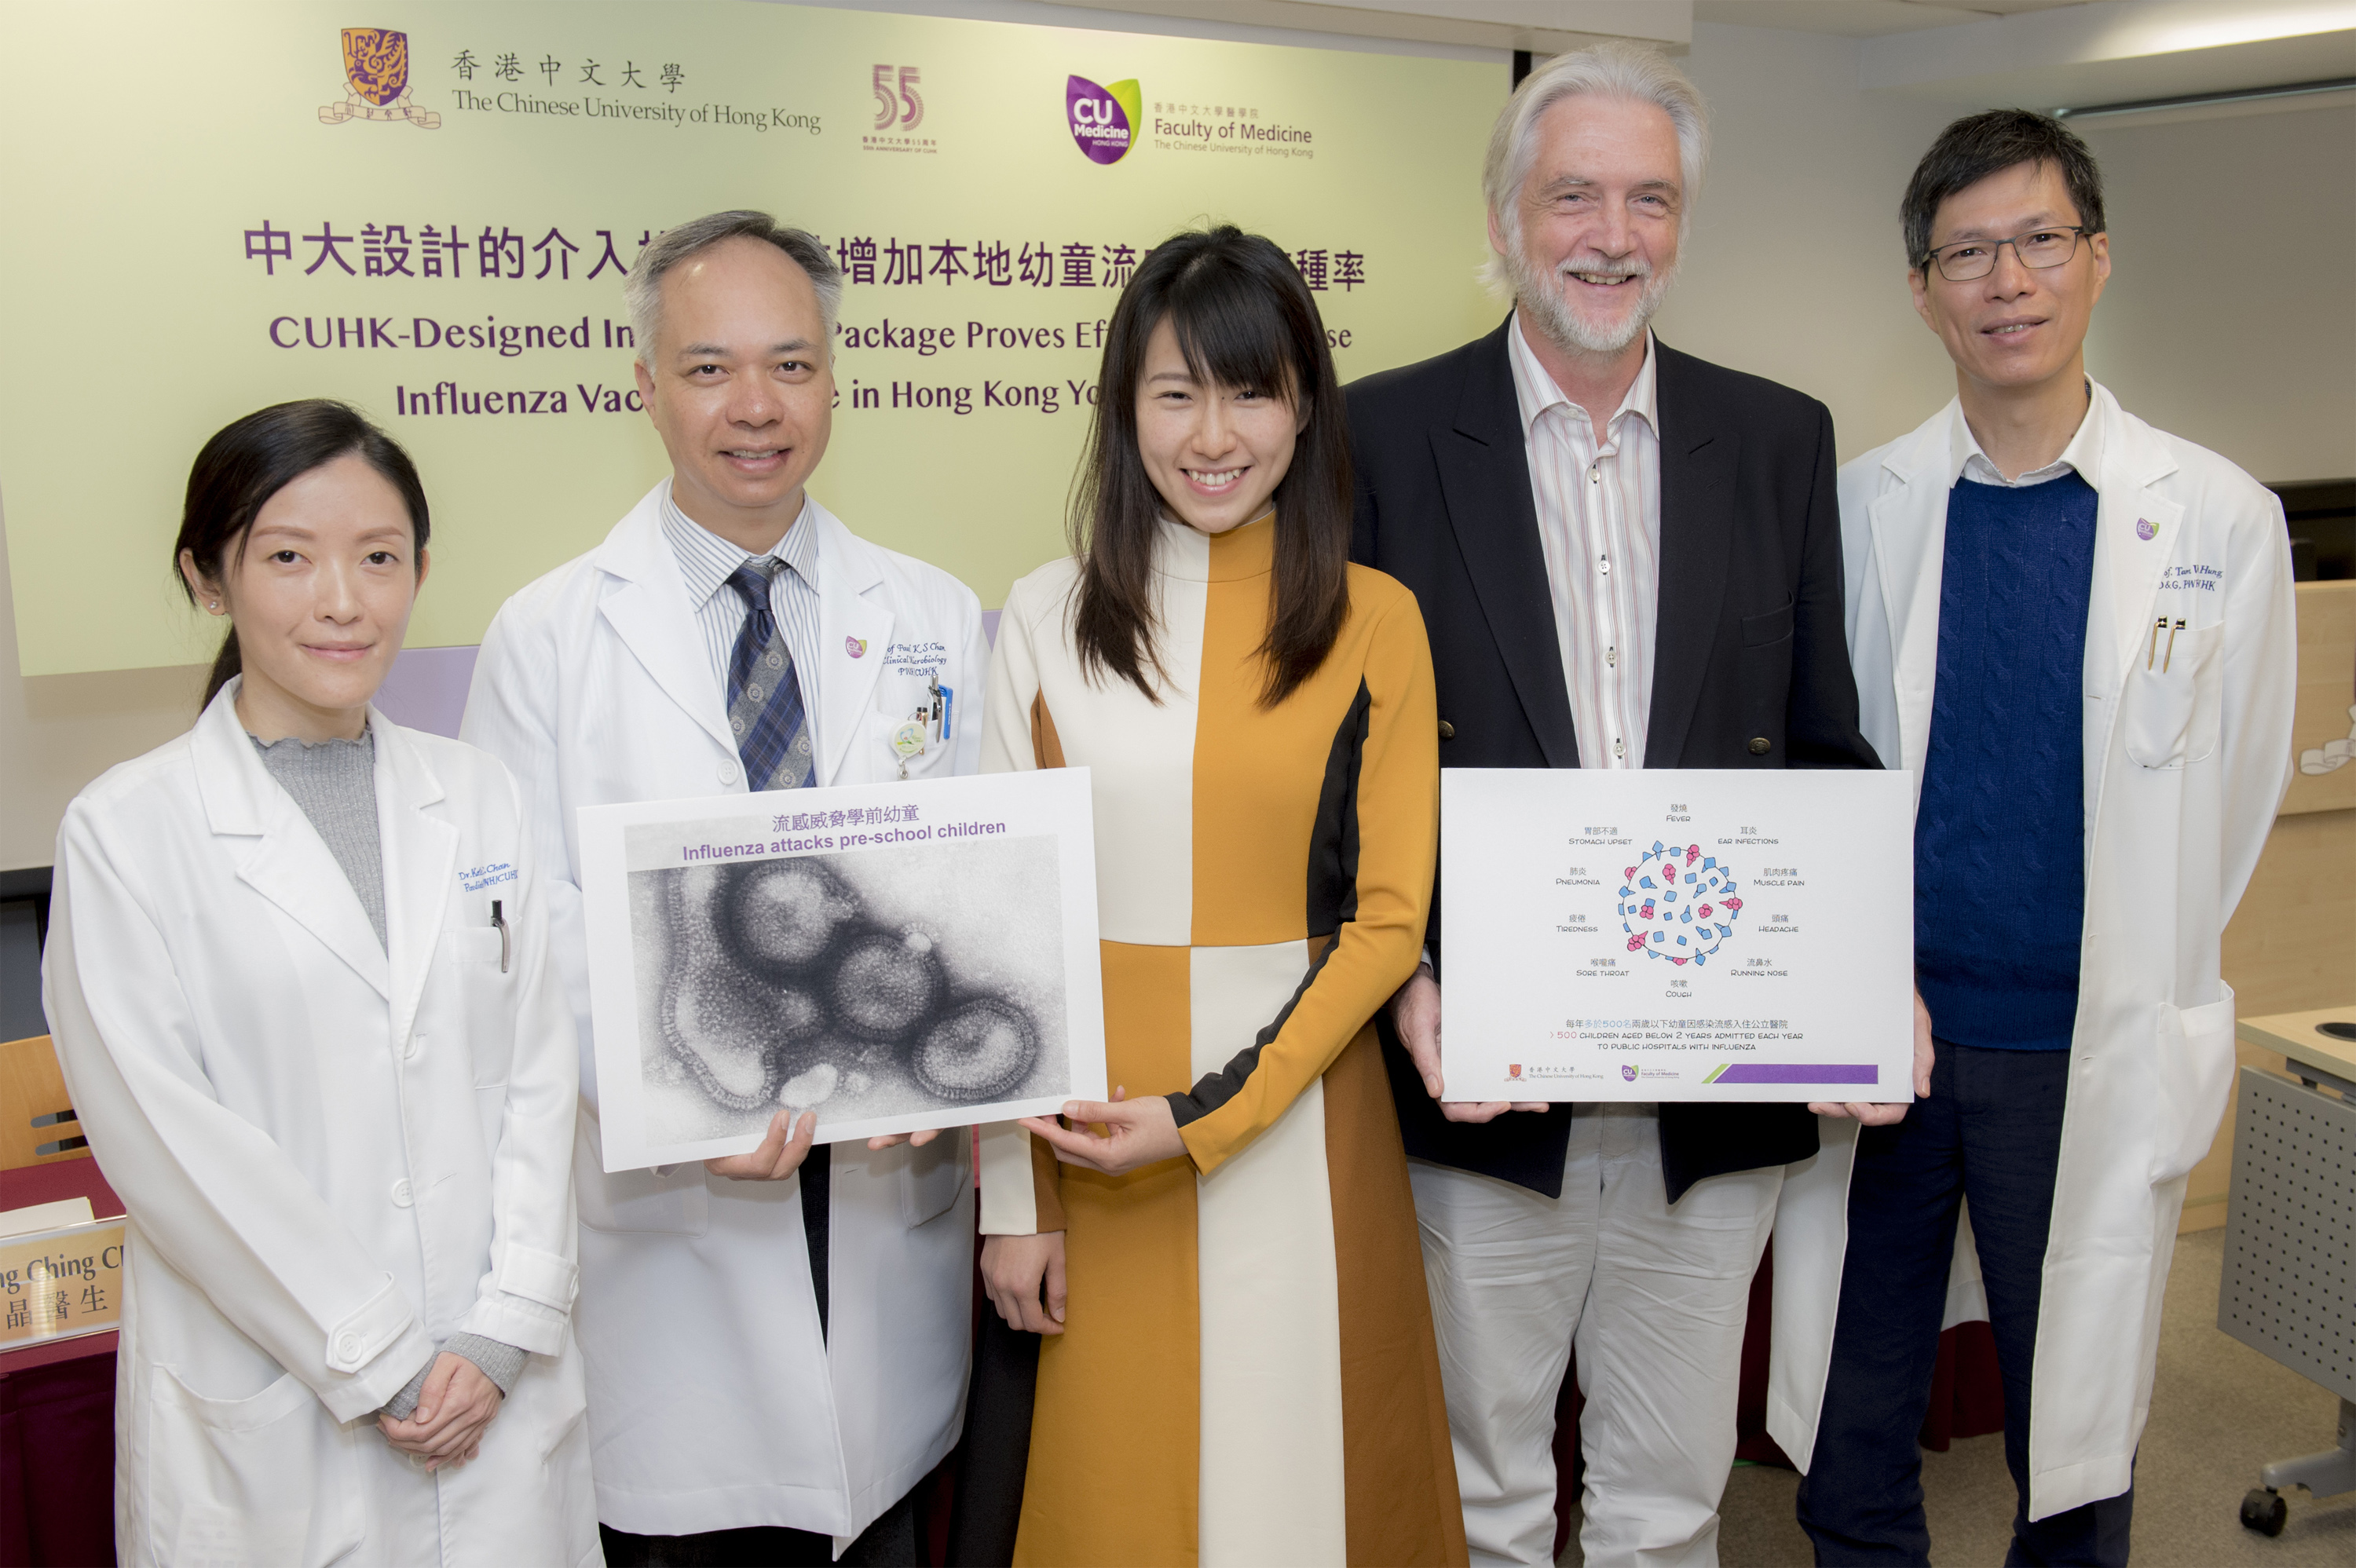 The Faculty of Medicine of CUHK has conducted an intervention trial which proved that a four-component intervention package, designed by CUHK research team, could triple influenza vaccination uptake in children aged below 2 years. (From left: Dr. Kate Ching Ching CHAN, Assistant Professor, Department of Paediatrics, CUHK; Prof. Paul Kay Sheung CHAN, Chairman, Department of Microbiology, CUHK; Dr. Karene Hoi Ting YEUNG, Postdoctoral Fellow, Department of Paediatrics, CUHK; Prof. Tony NELSON, Clinical Professional Consultant, Department of Paediatrics, CUHK; and Prof. Wing Hung TAM, Professor, Department of Obstetrics and Gynaecology)